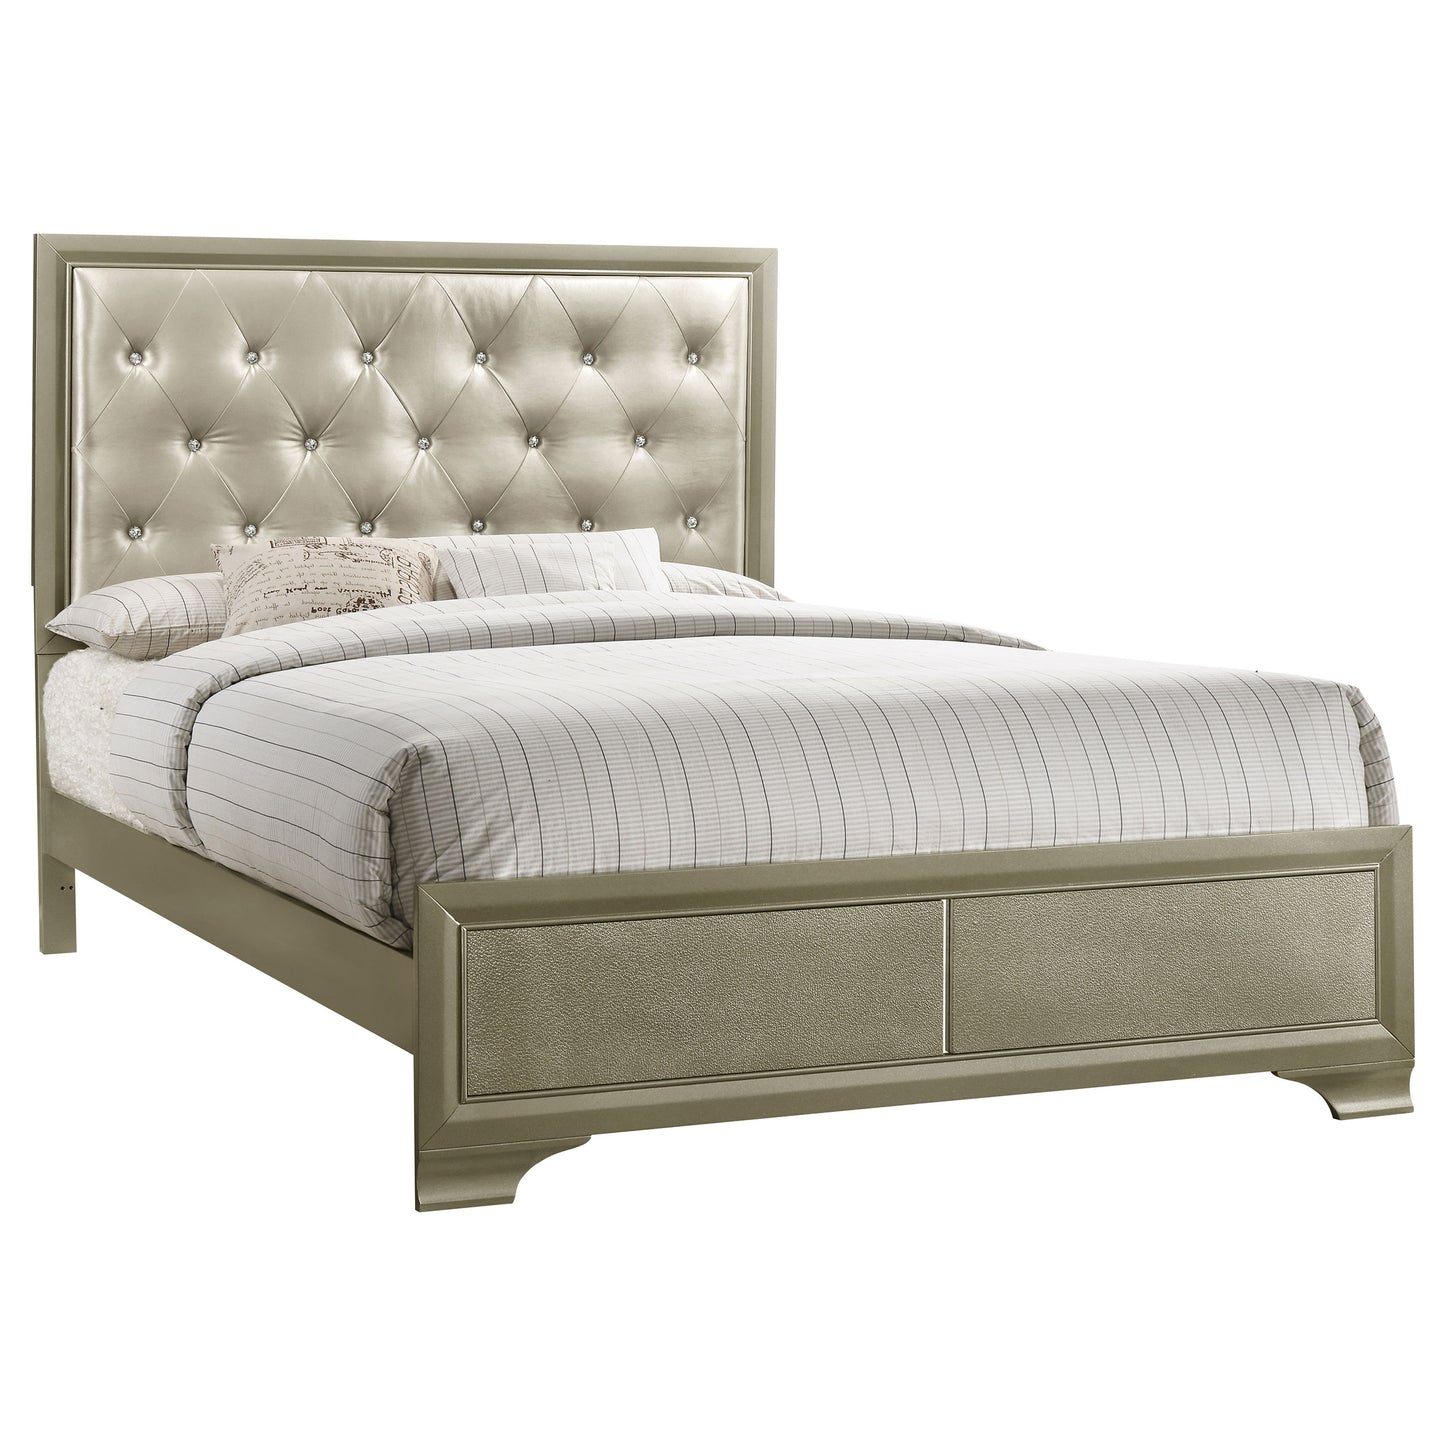 Beaumont 4-piece Eastern King Bedroom Set Champagne